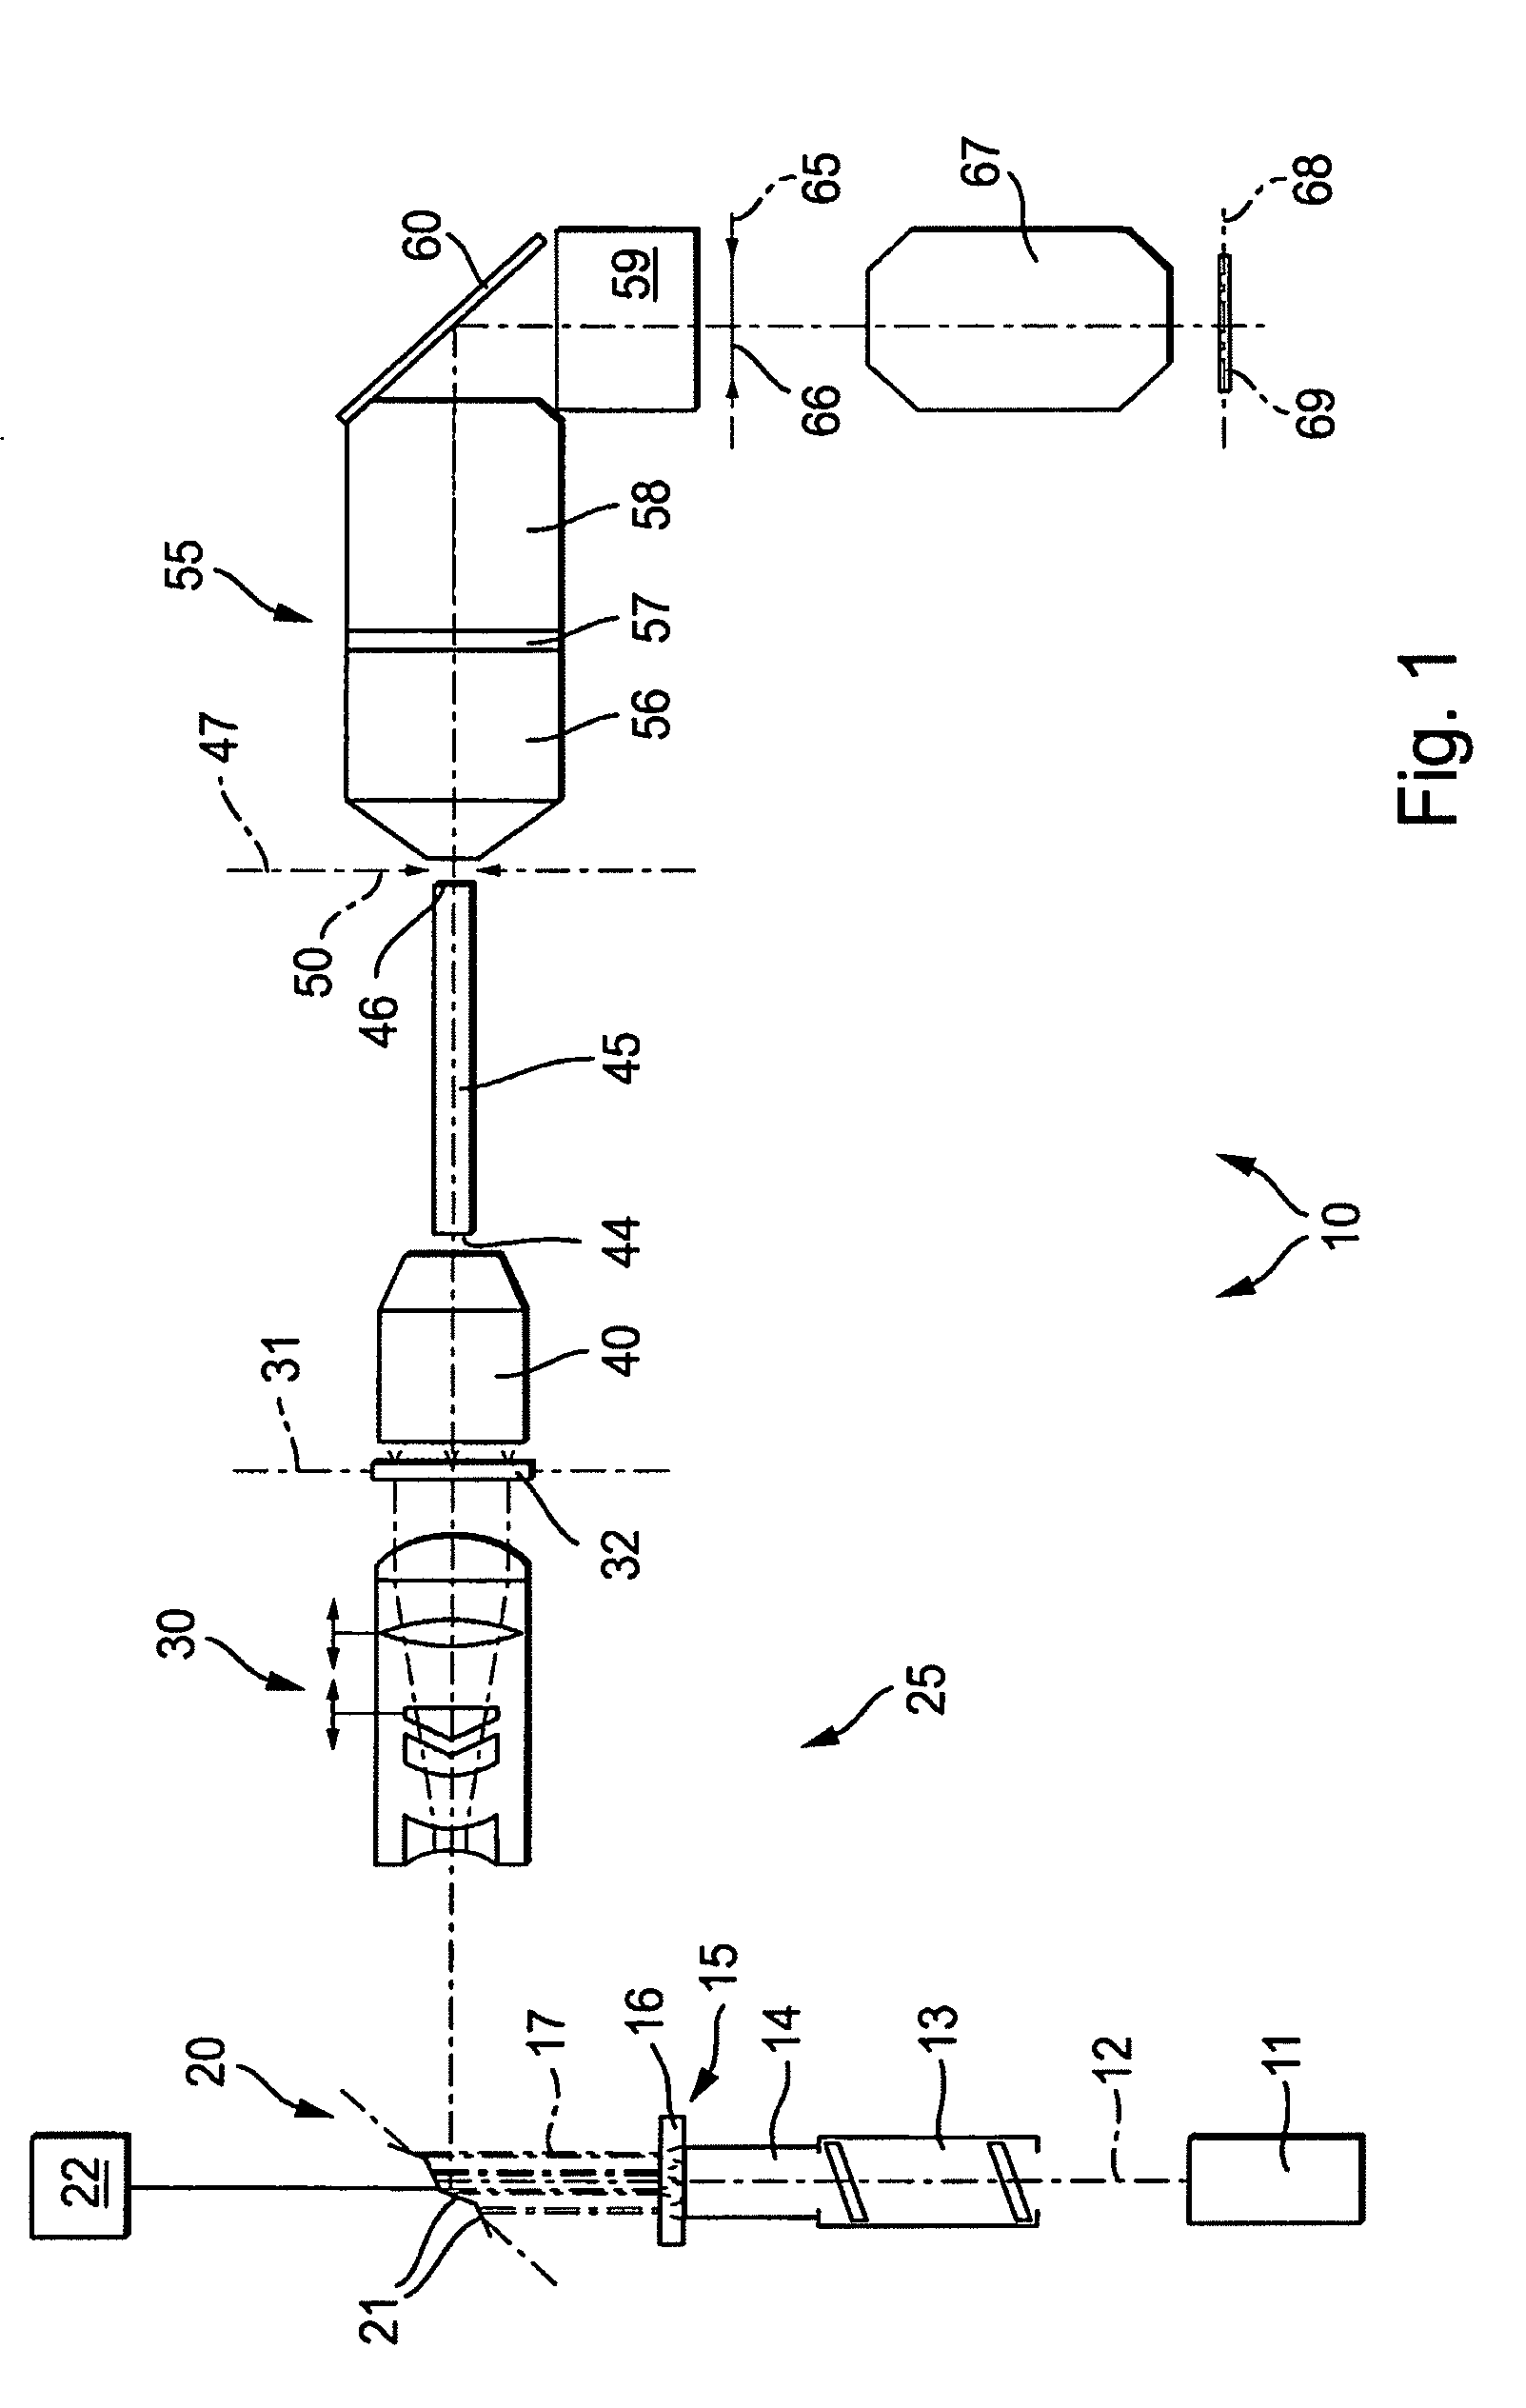 Illumination system for a microlithography projection exposure installation